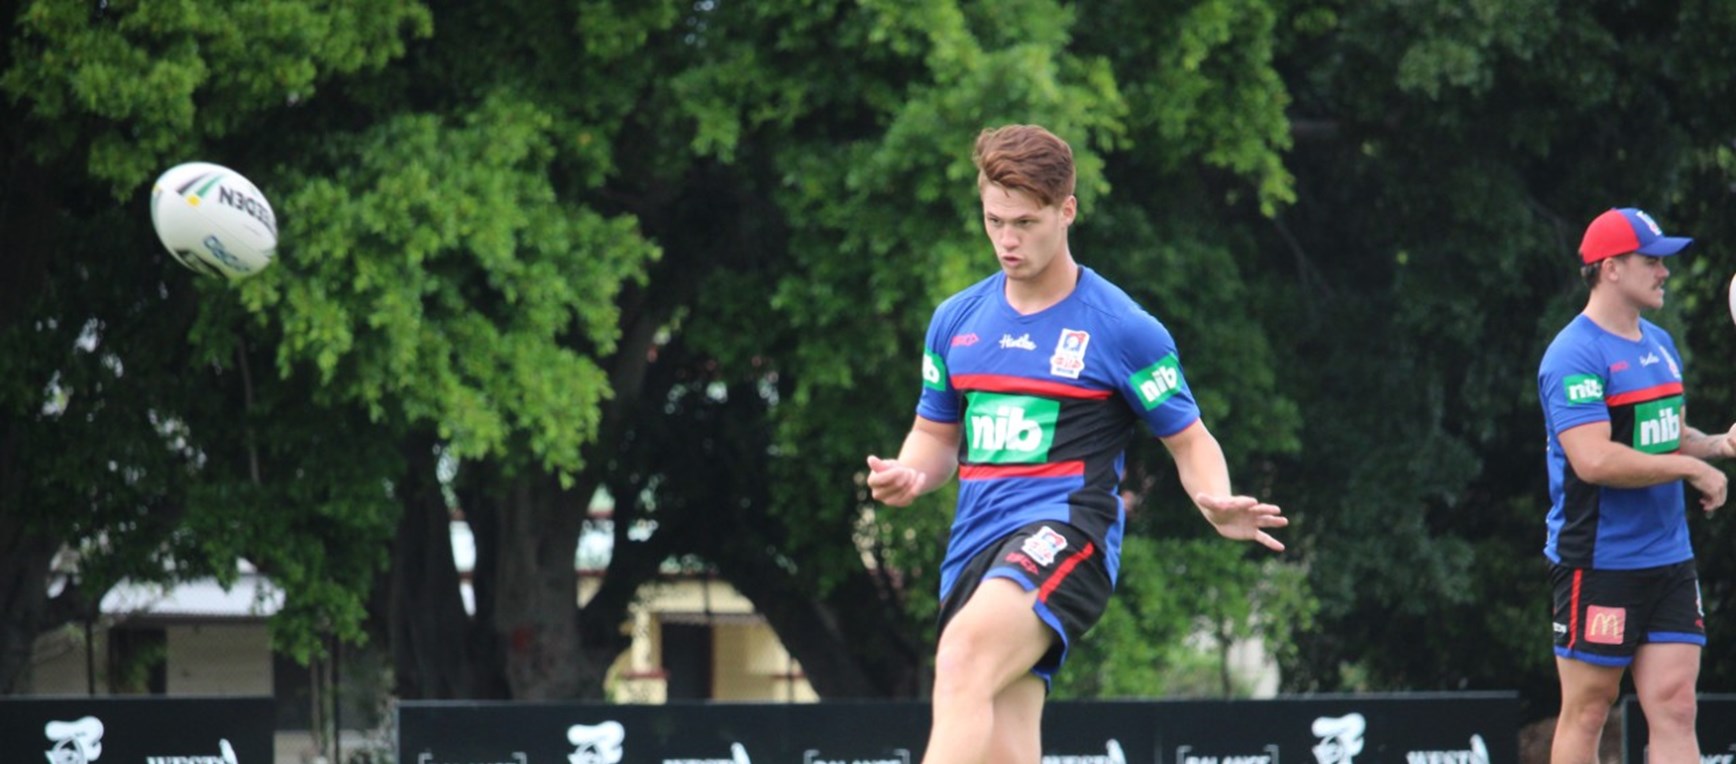 Gallery: Ponga's first day